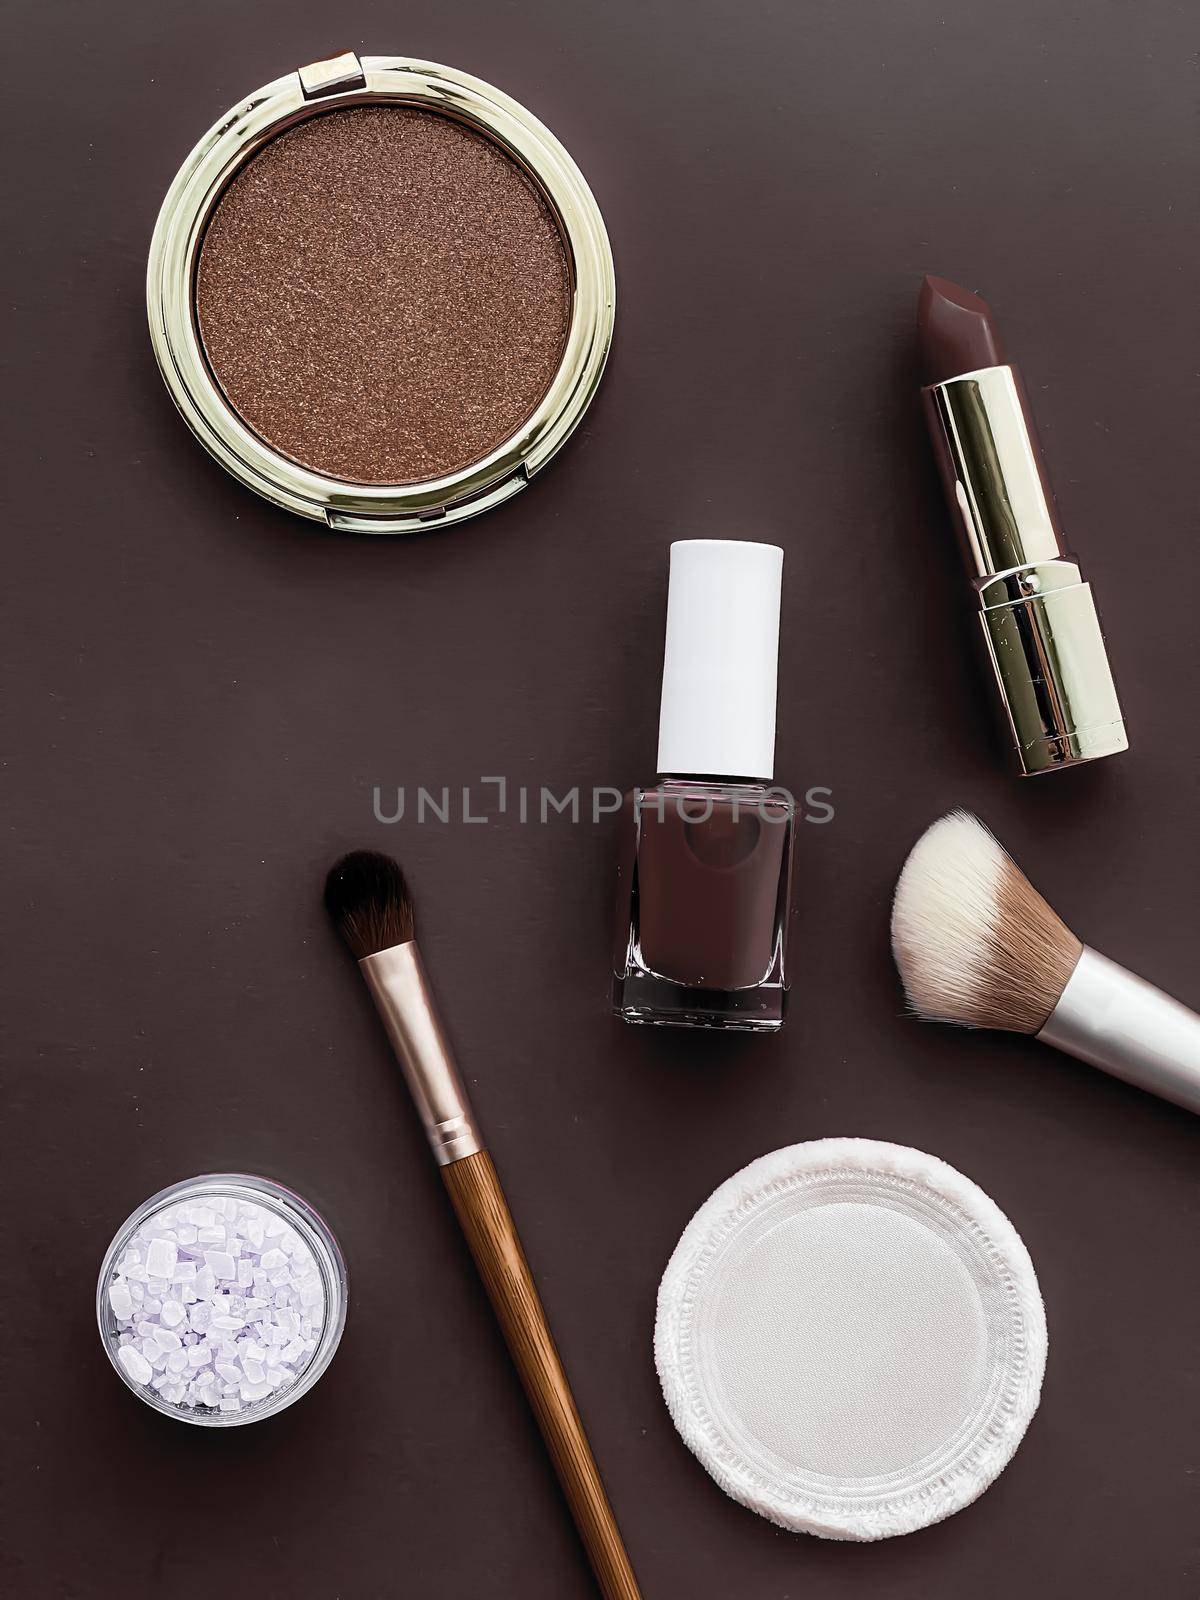 Beauty, make-up and cosmetics flatlay design with copyspace, cosmetic products and makeup tools on brown background, girly and feminine style concept